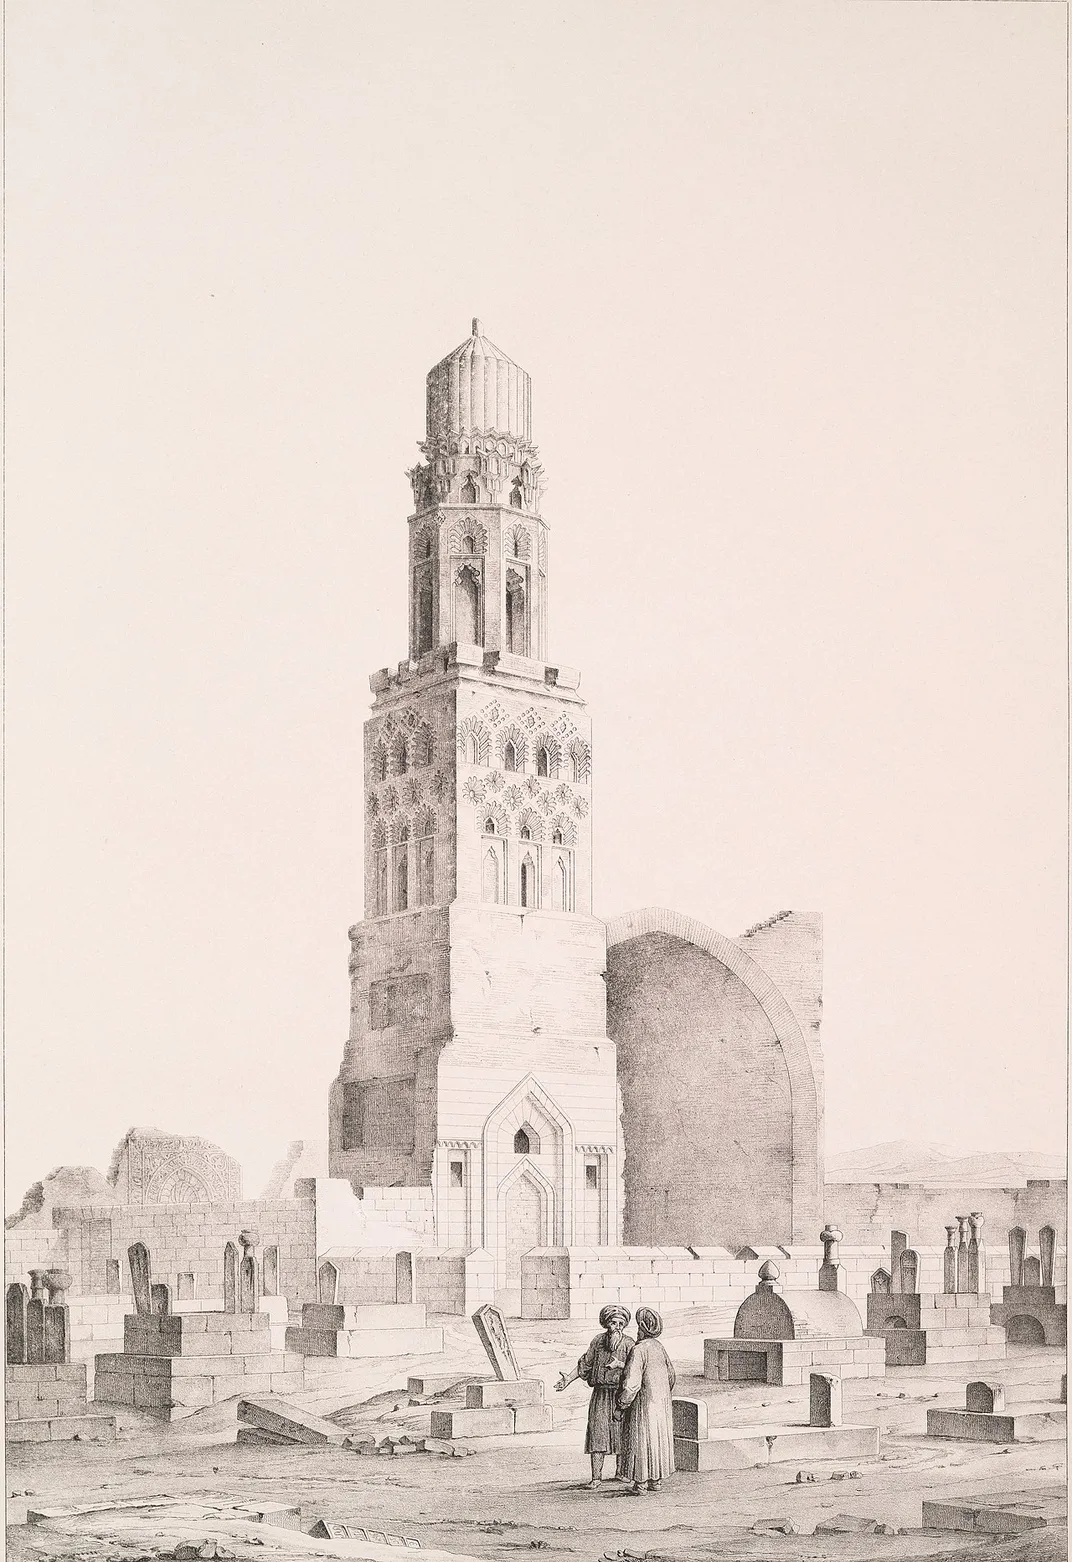 A 19th-century drawing of the tomb of Shajar al-Durr, who ruled independently as the sultana of Egypt for three months